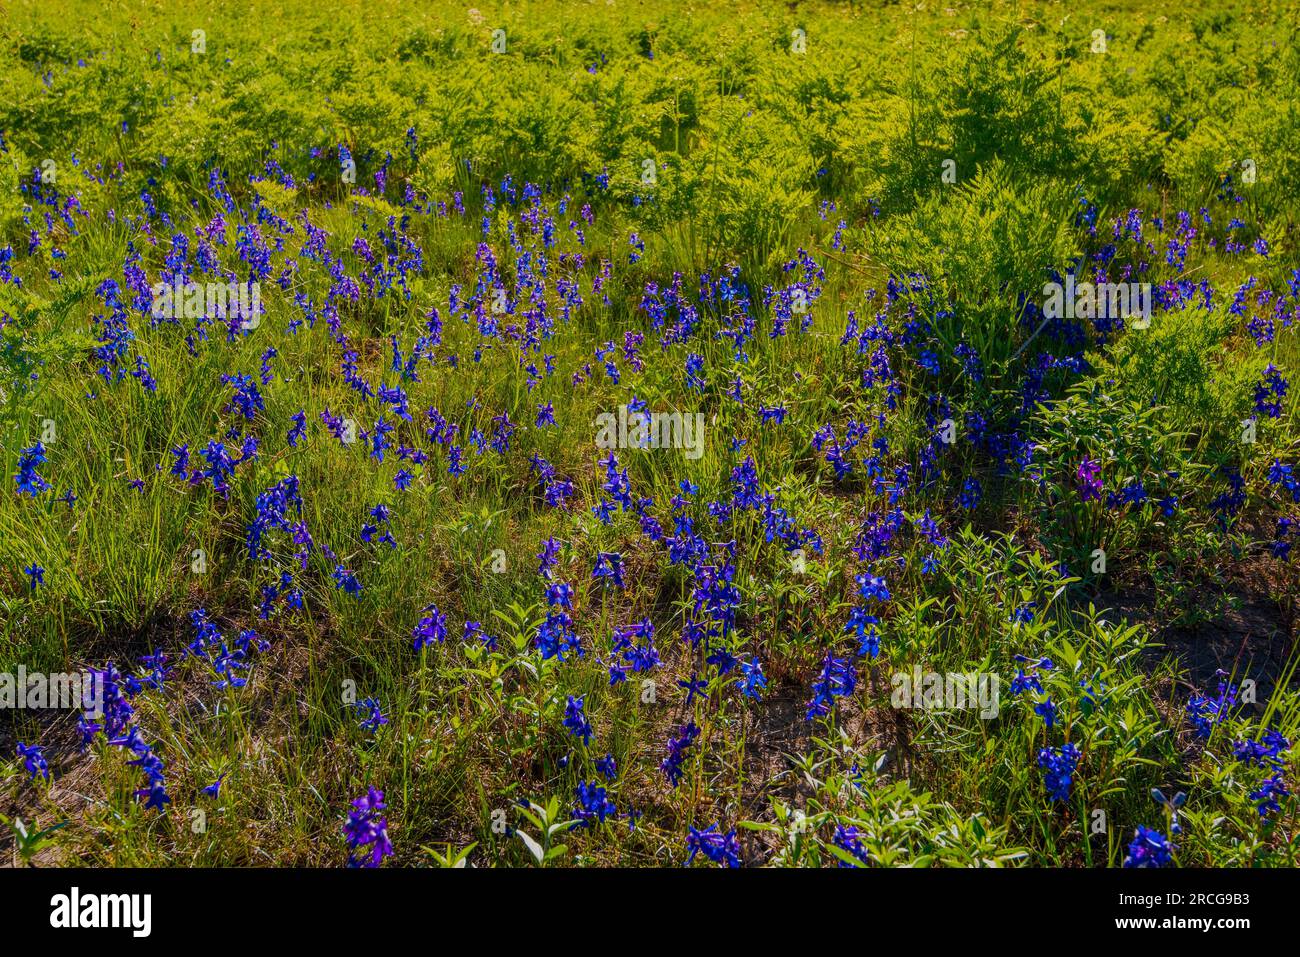 Vibrant wildflowers blooming on a hillside after a long winter. Stock Photo